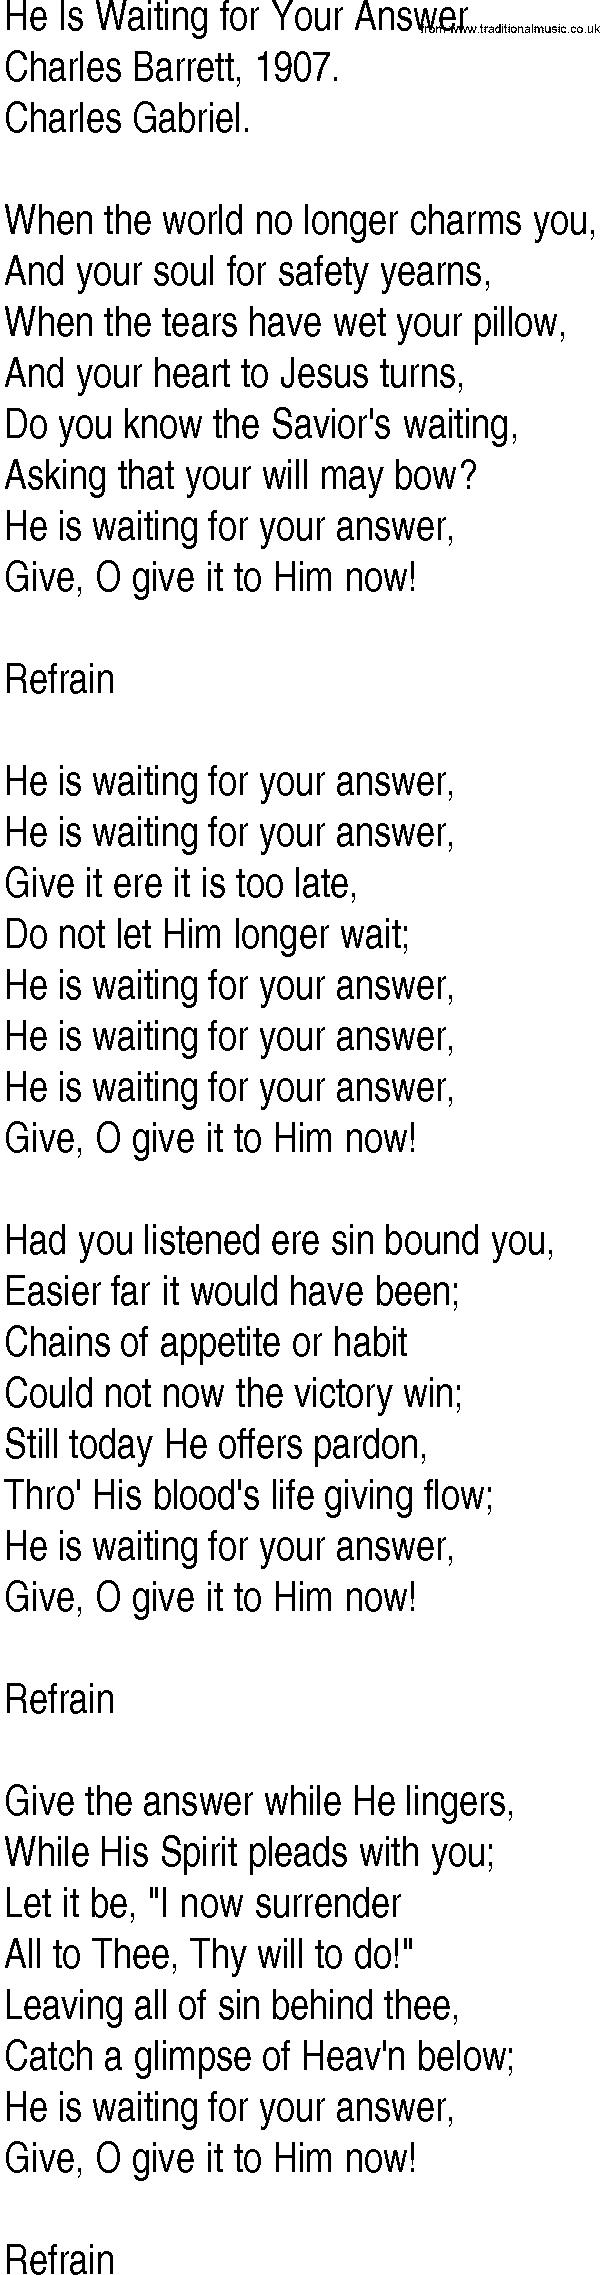 Hymn and Gospel Song: He Is Waiting for Your Answer by Charles Barrett lyrics